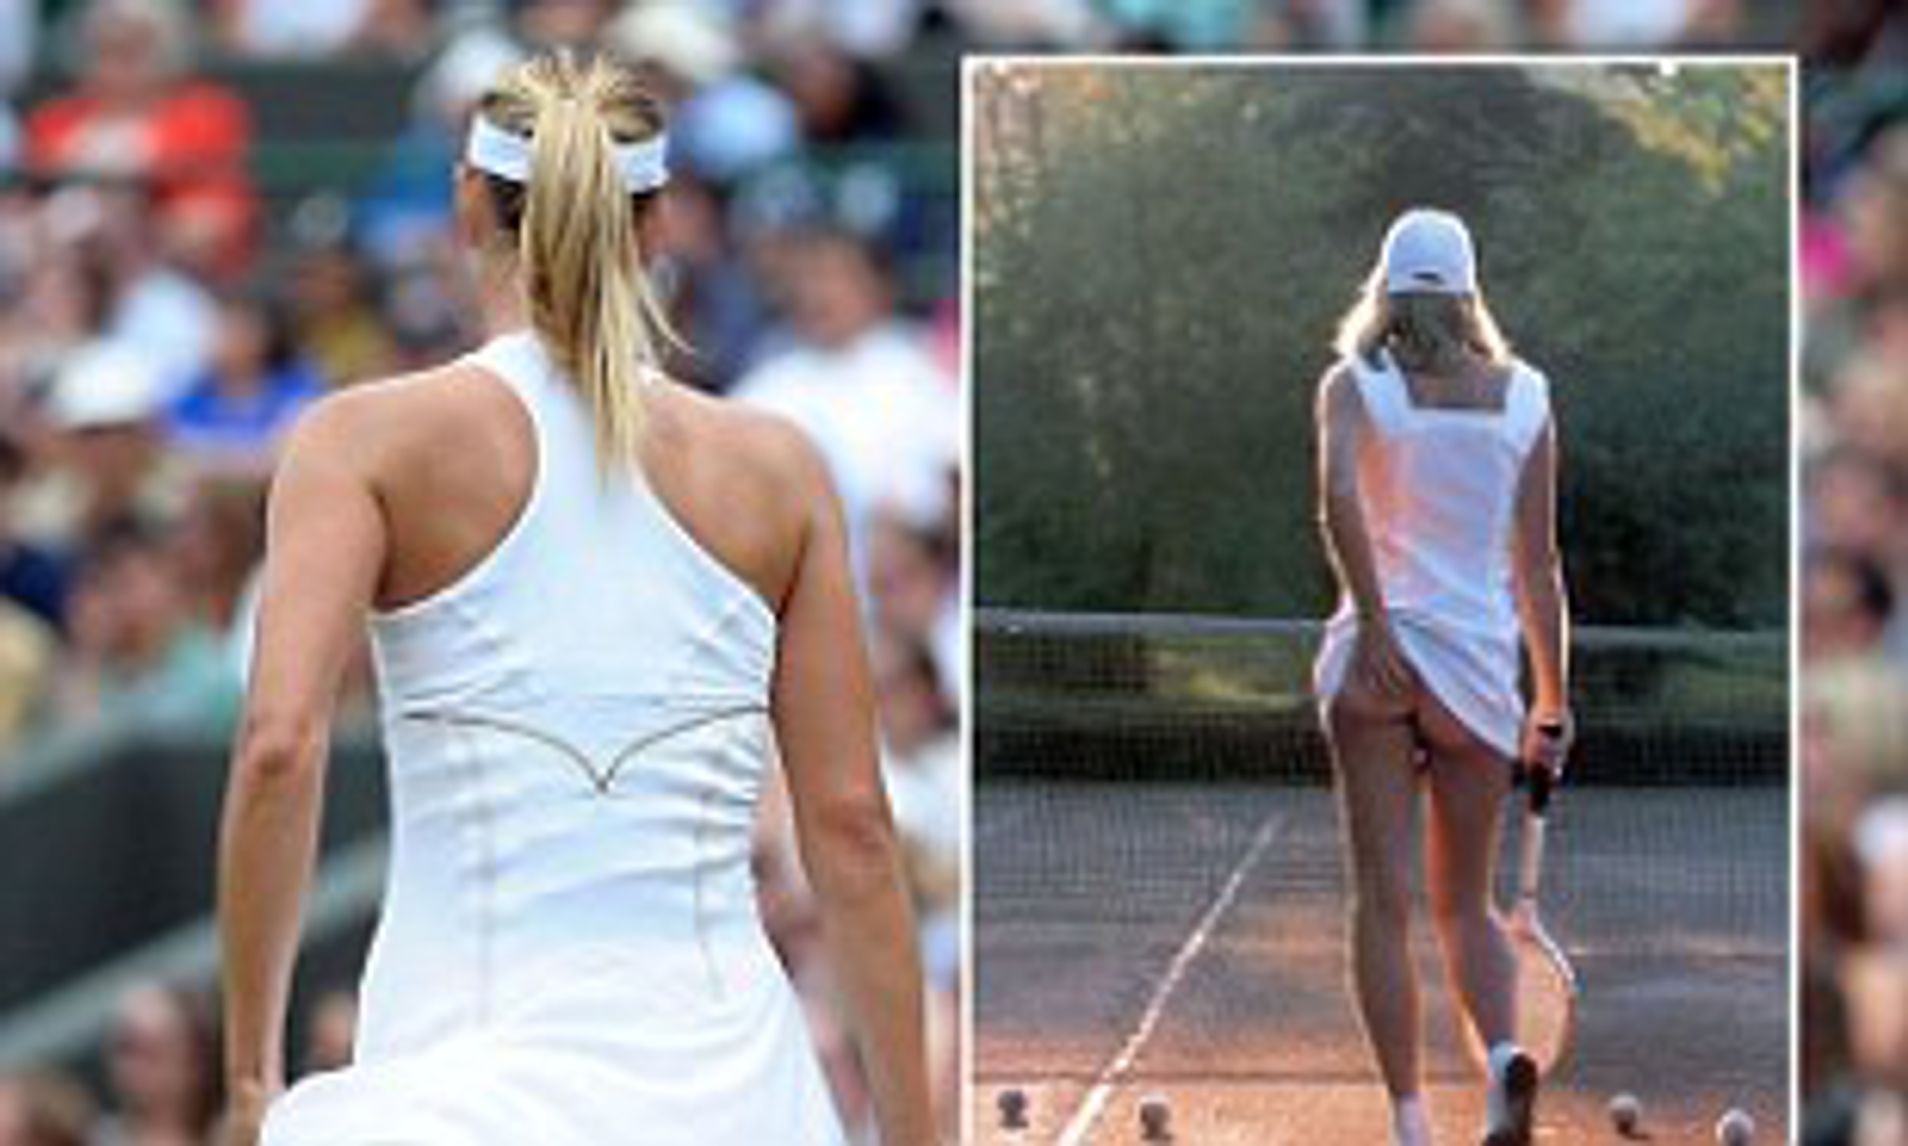 blossom clark recommends tennis without panties pic